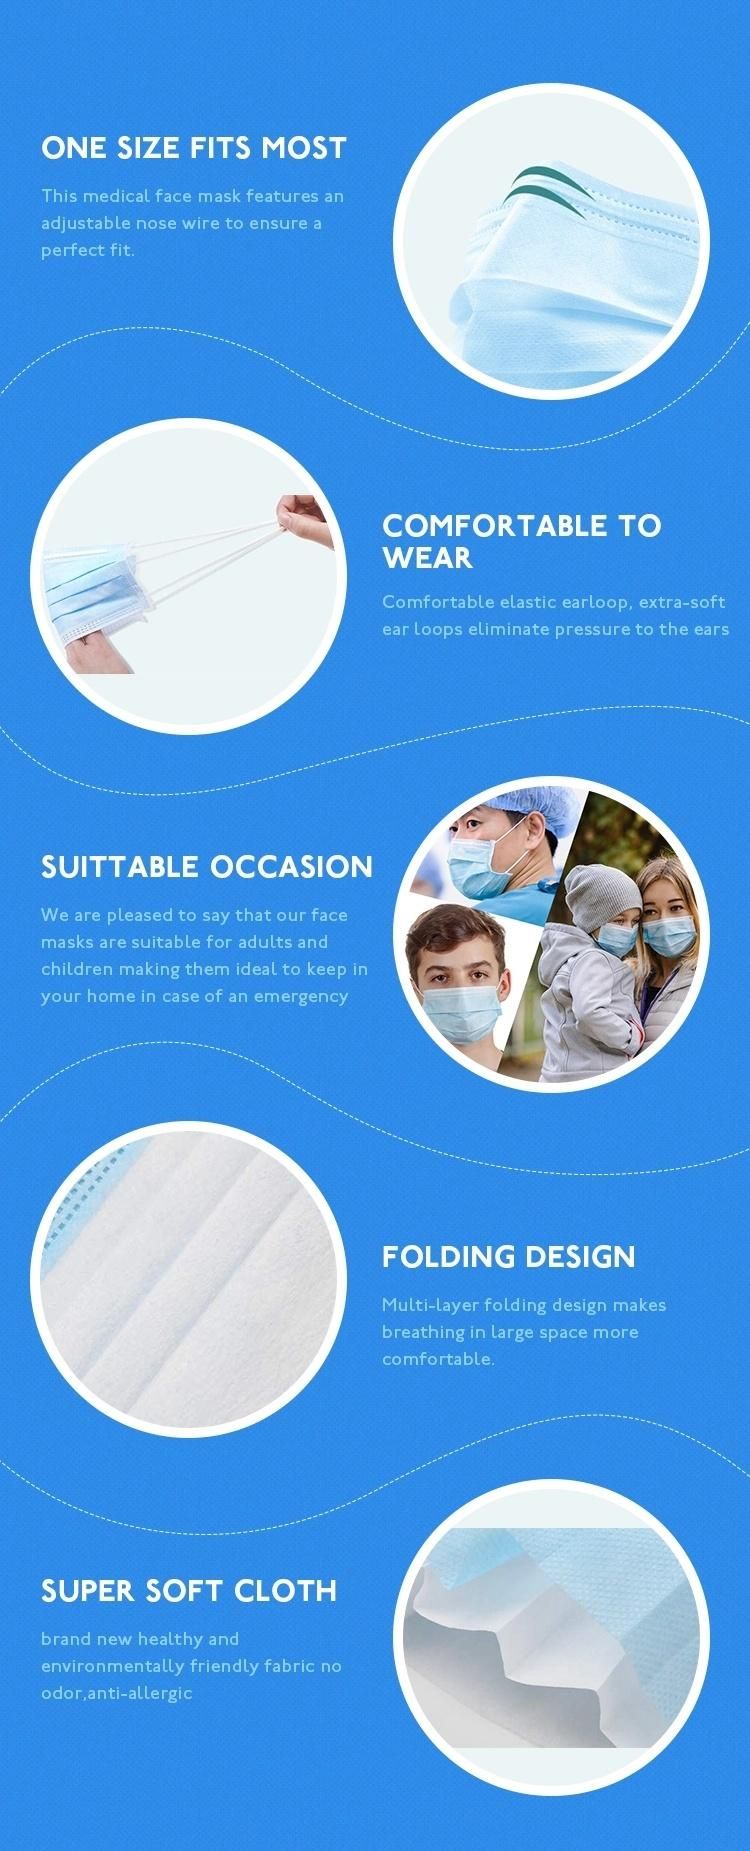 China Mask Factory Sterile Type Disposable Medical Mask for Exporting